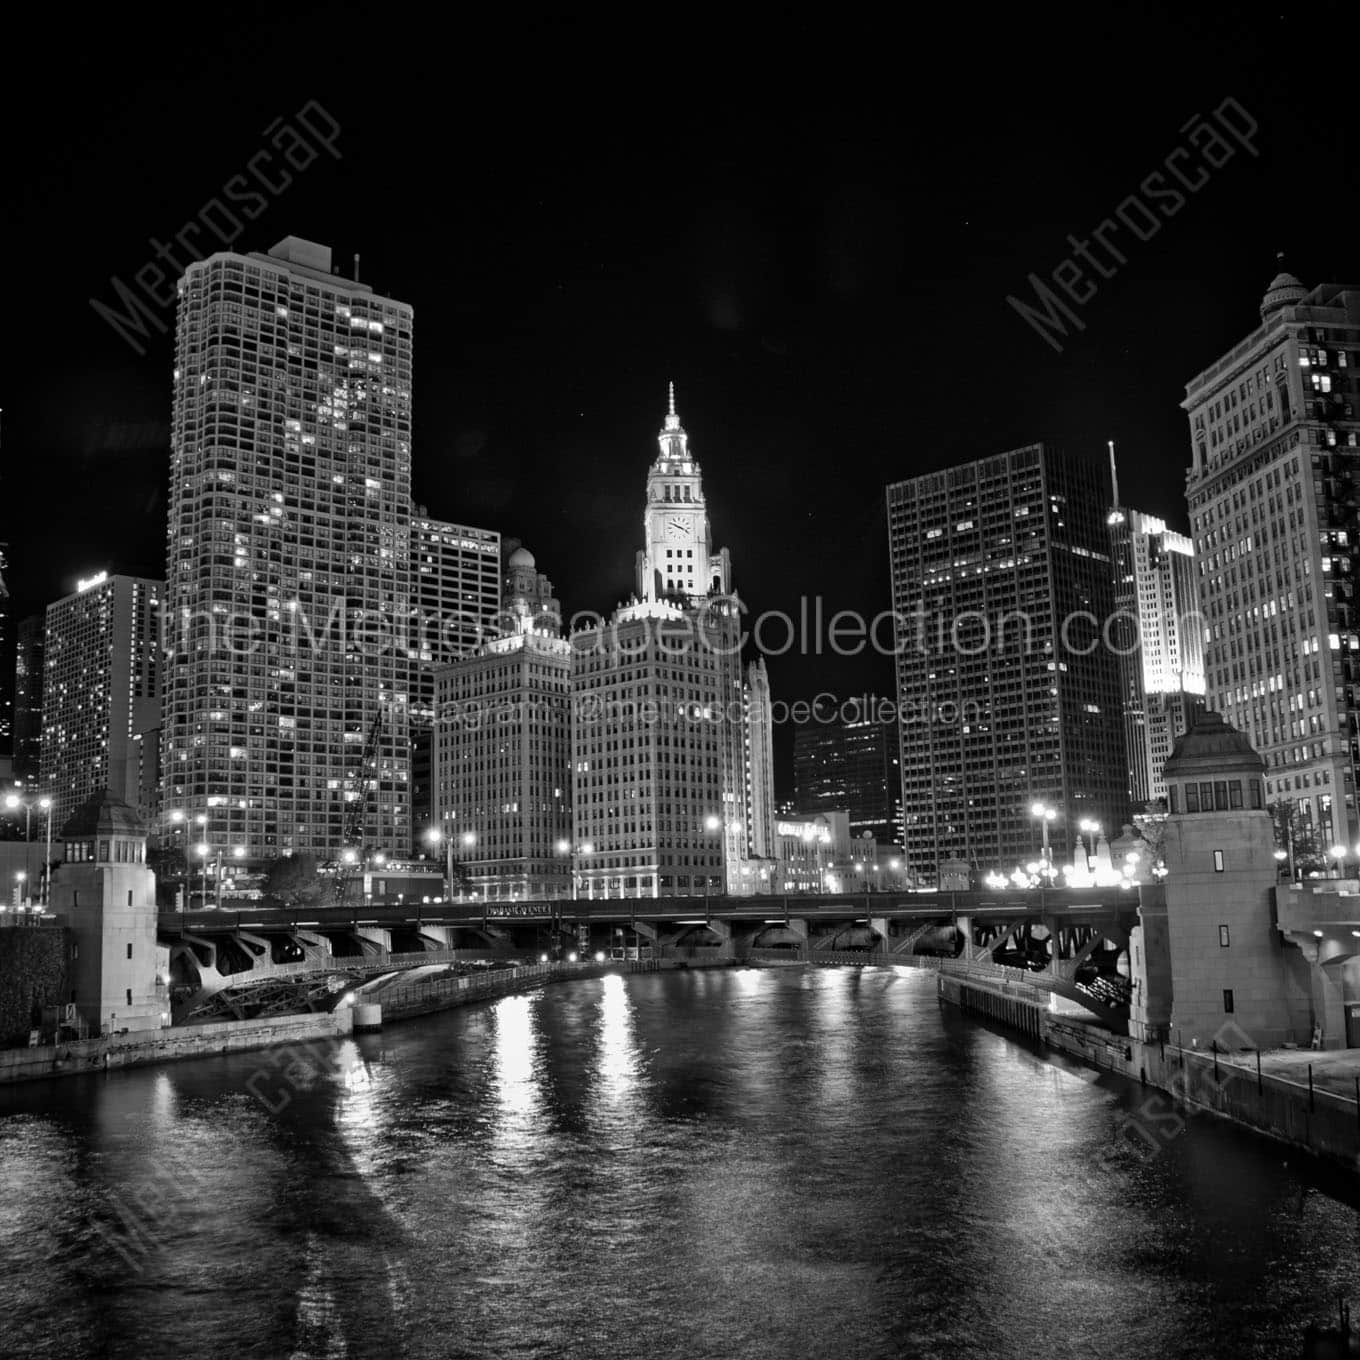 wrigley building and chicago river at night Black & White Office Art